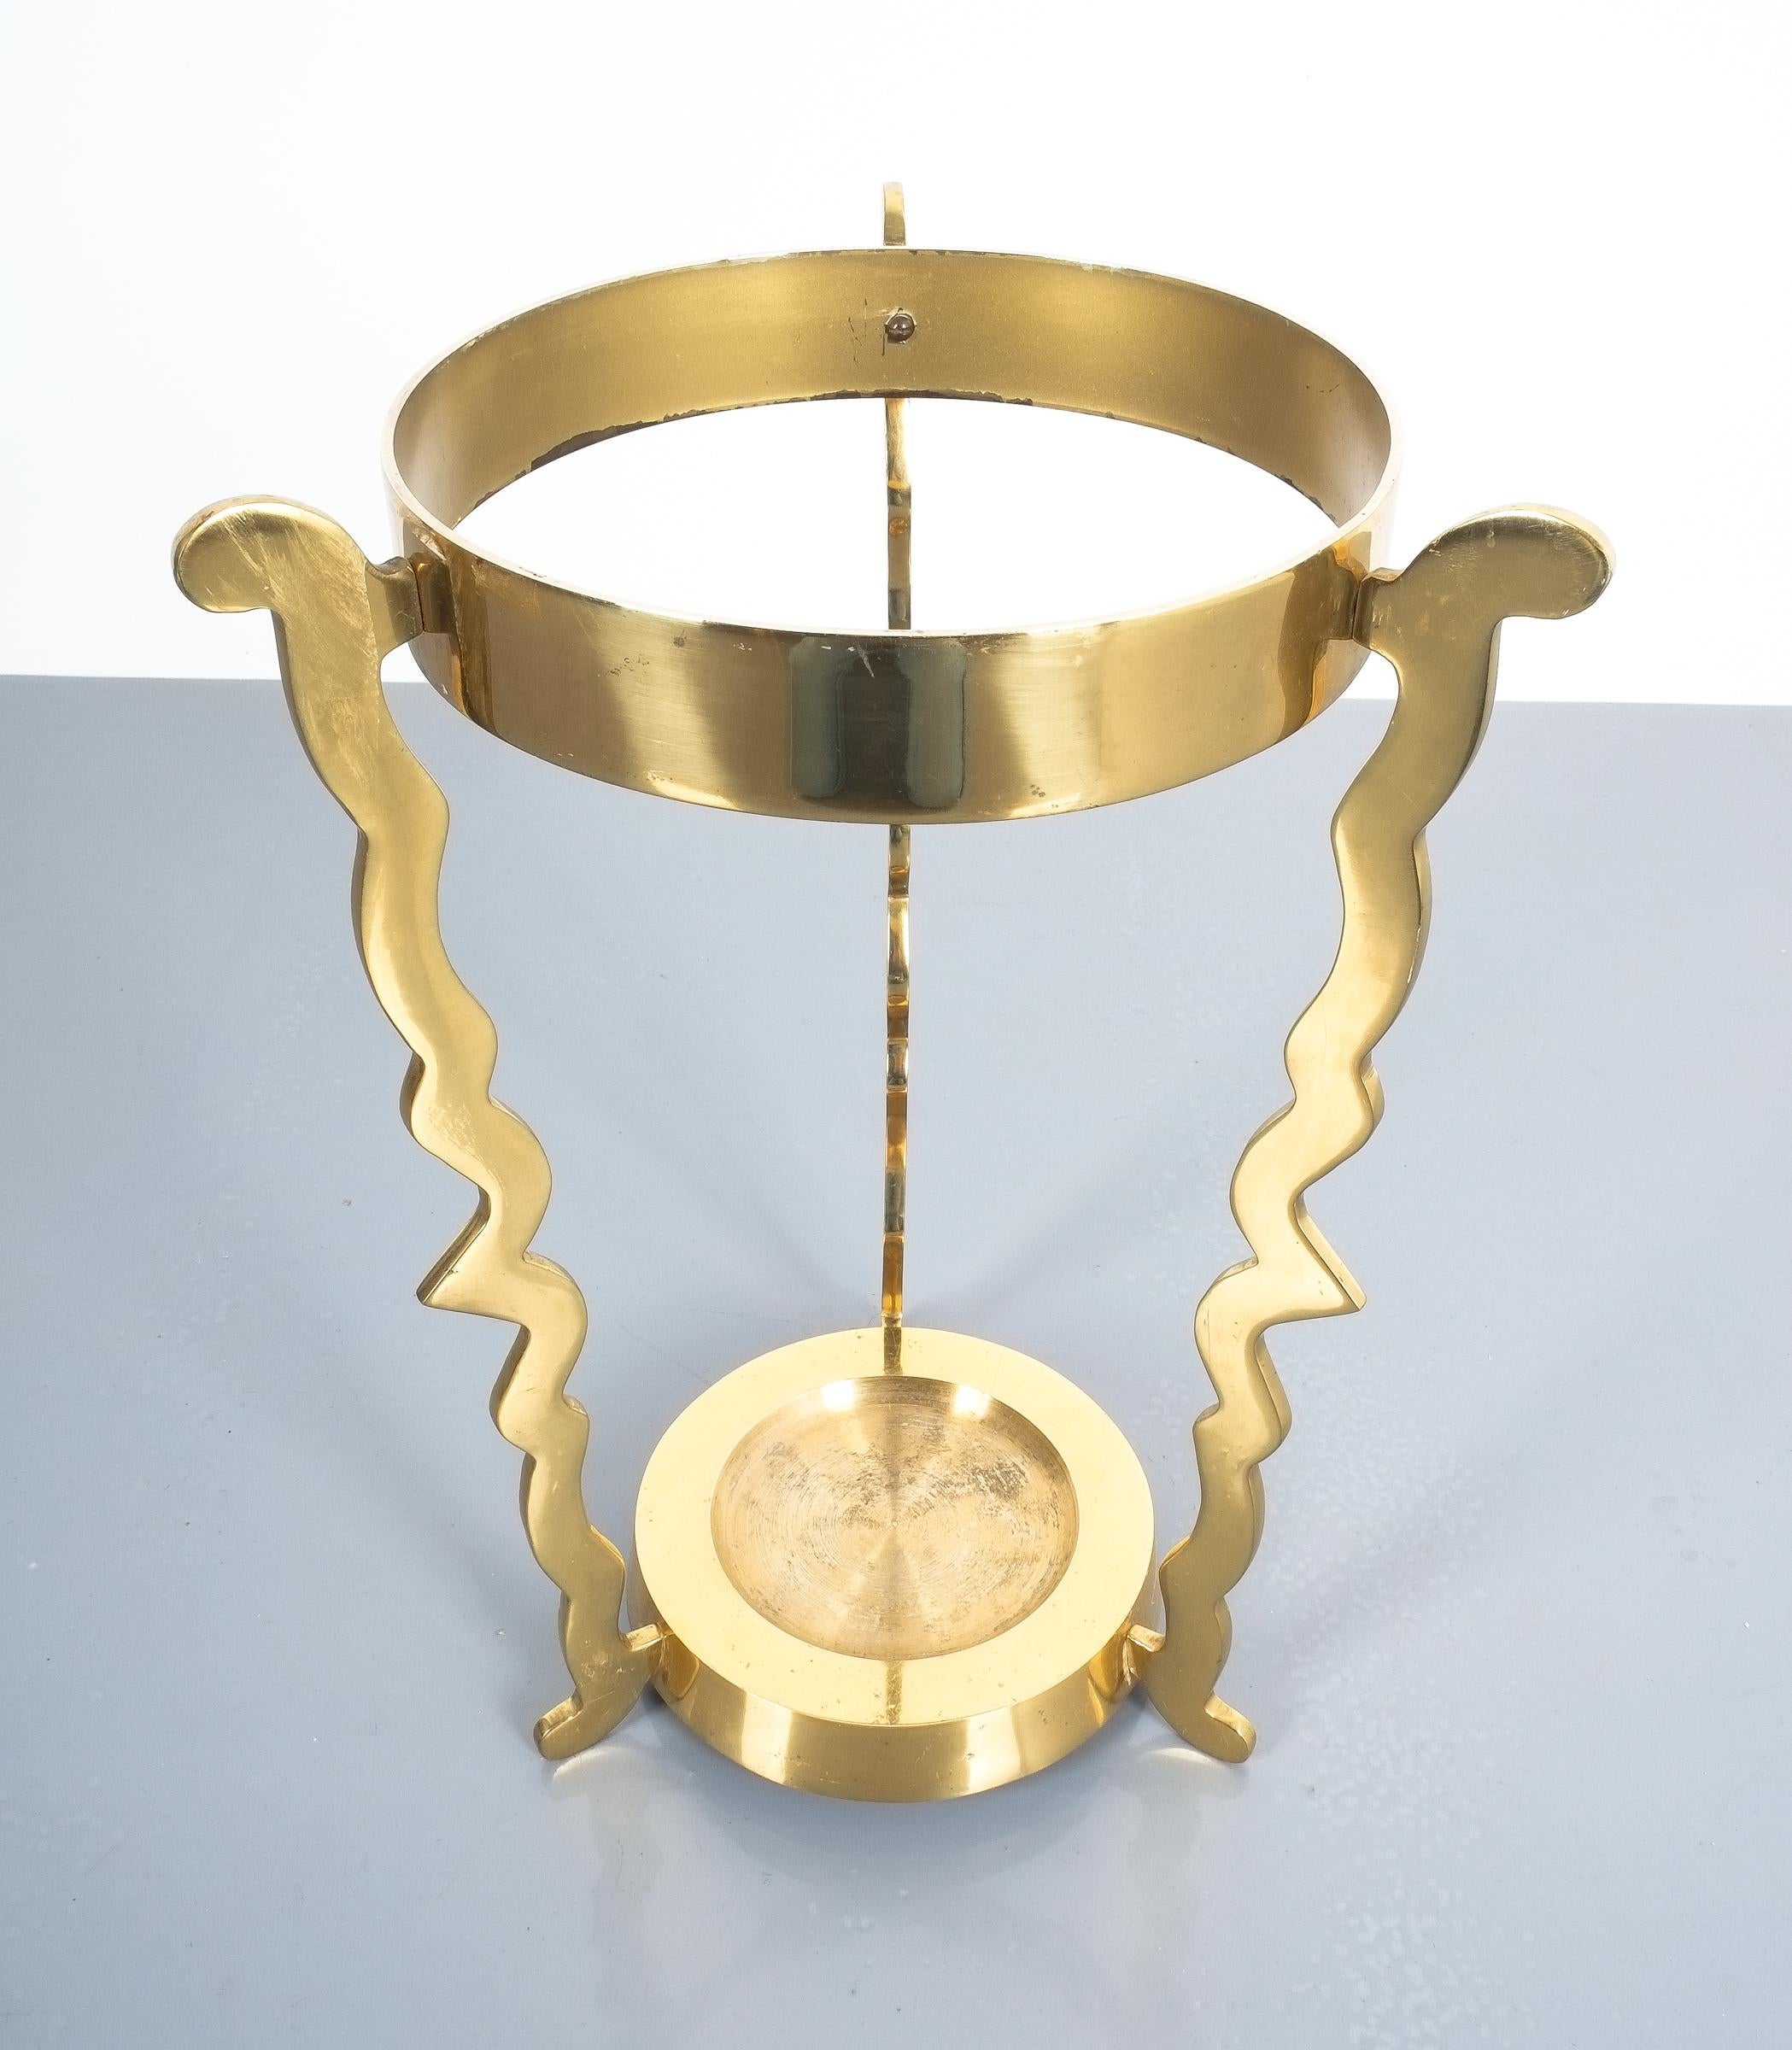 Mid-20th Century Midcentury Umbrella Stand From Solid Brass For Sale